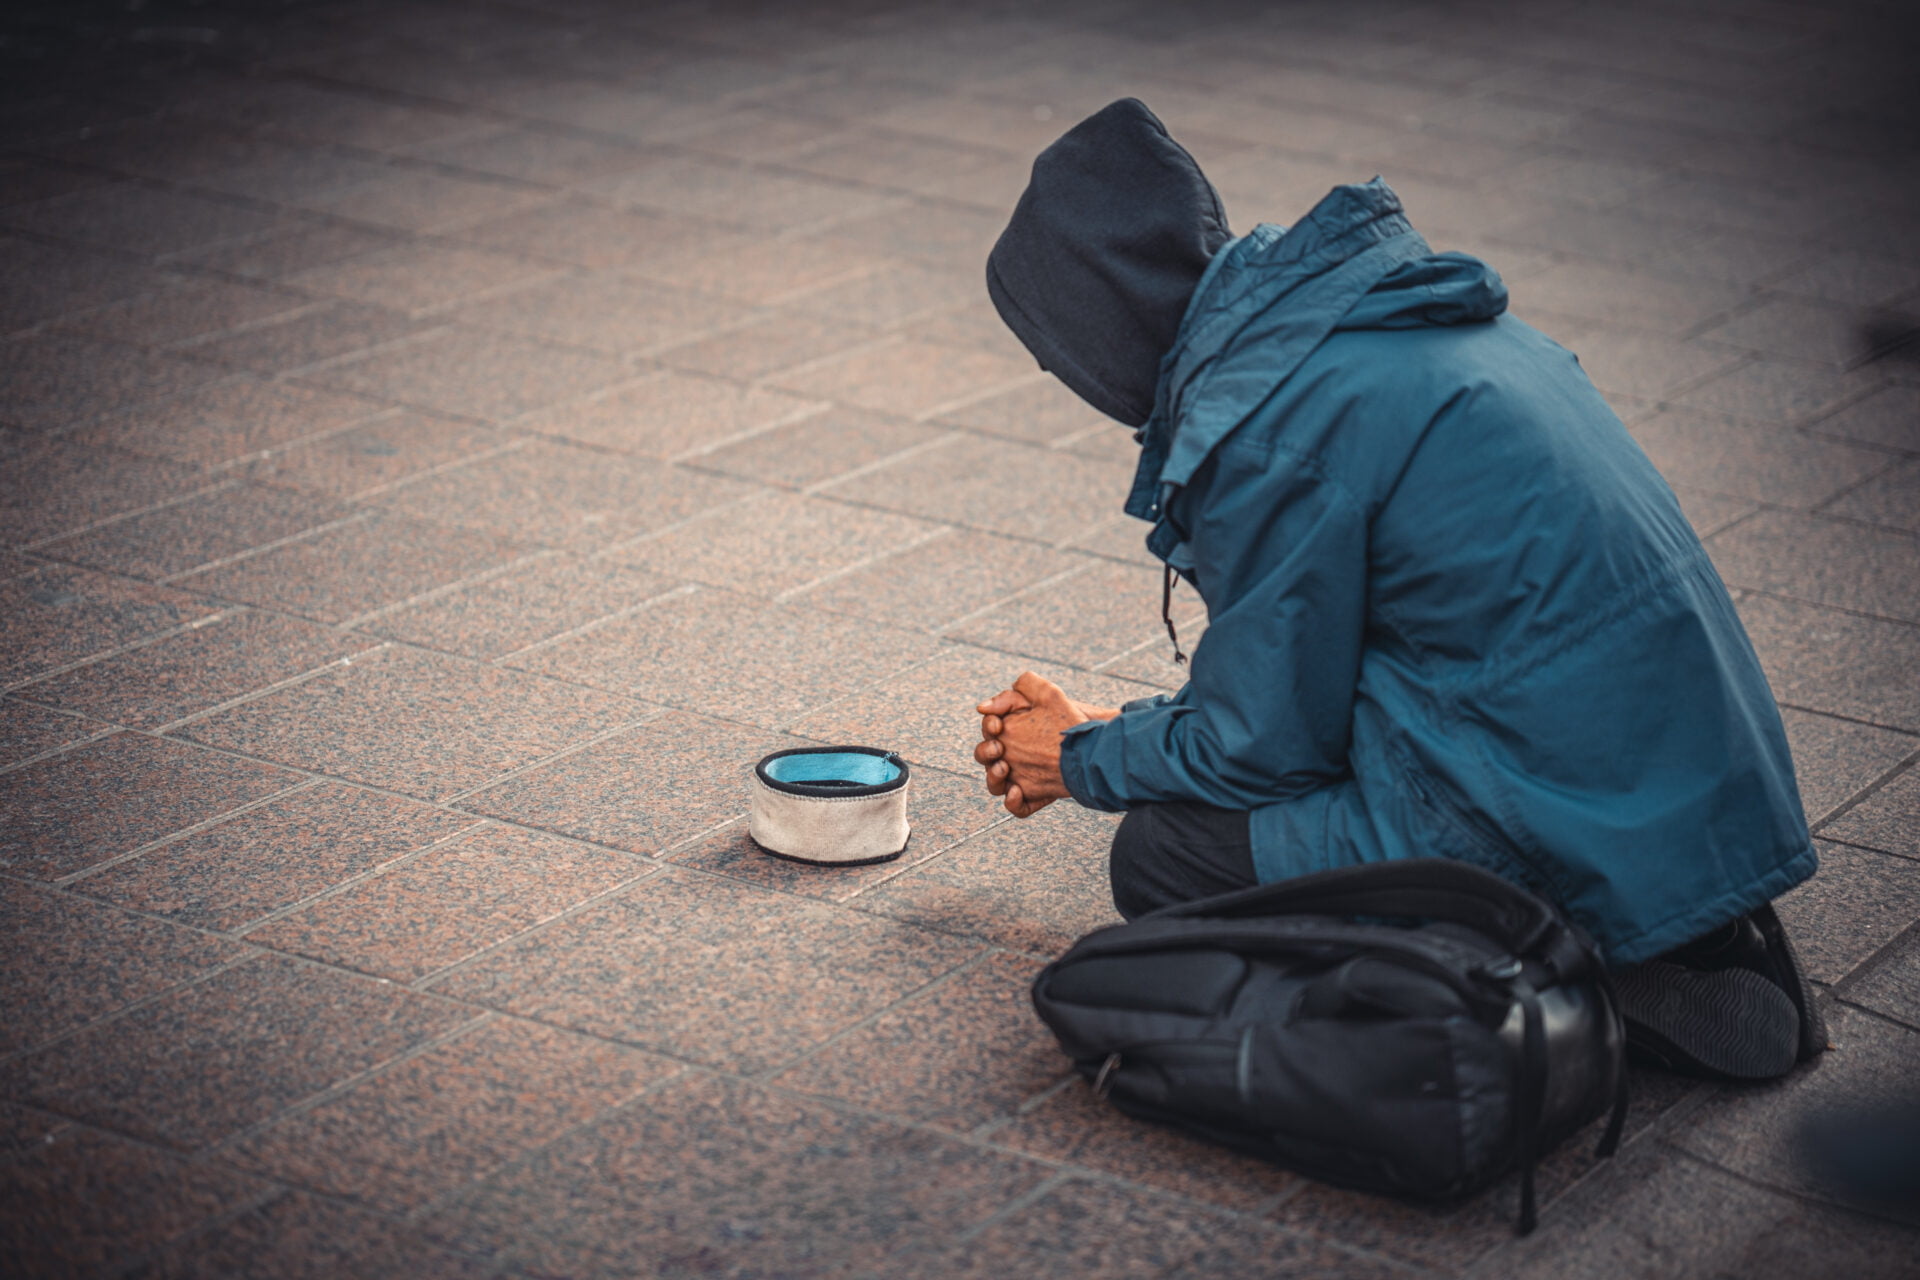 An individual in a blue jacket and hood, kneeling on the street with a hat placed in front for donations.